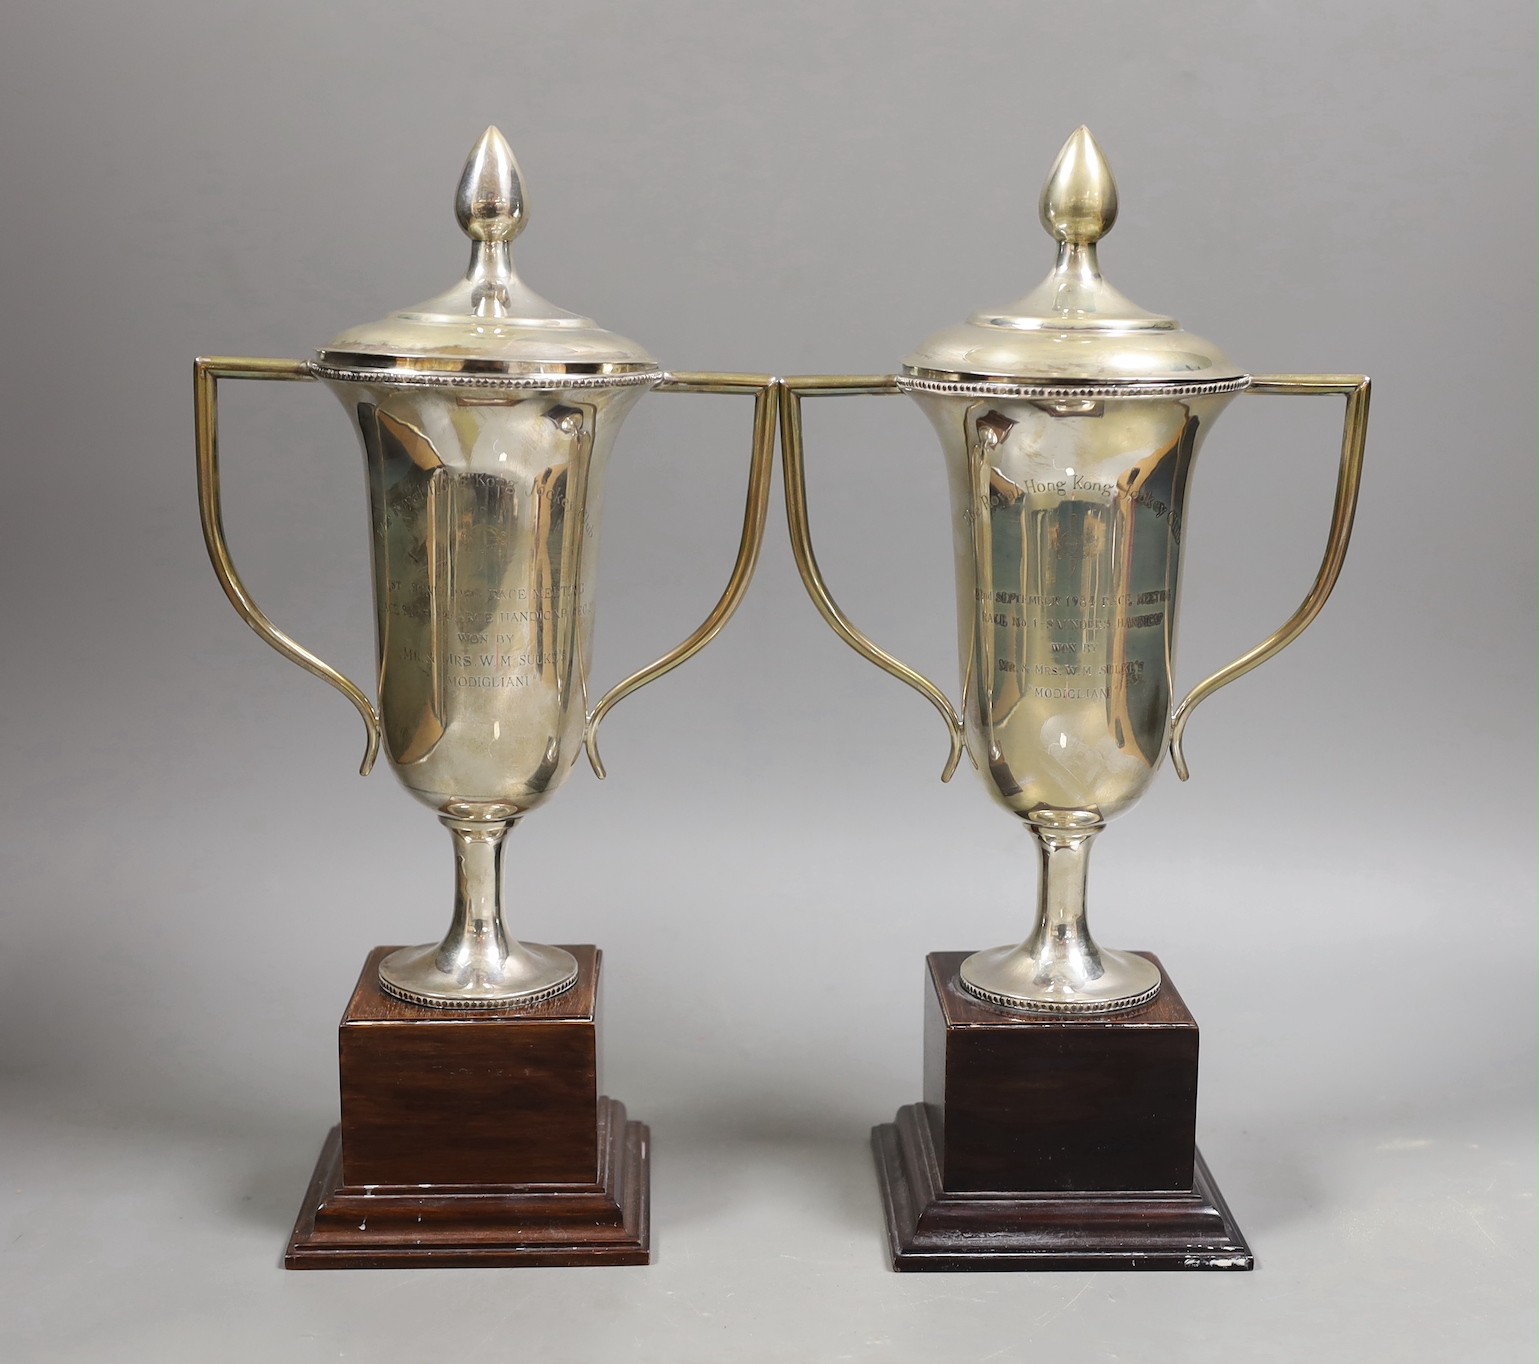 A pair of Royal Hong Kong Jockey Club sterling presentation two handled trophy cups and covers, fixed to wooden plinth bases, height of cups 26cm.